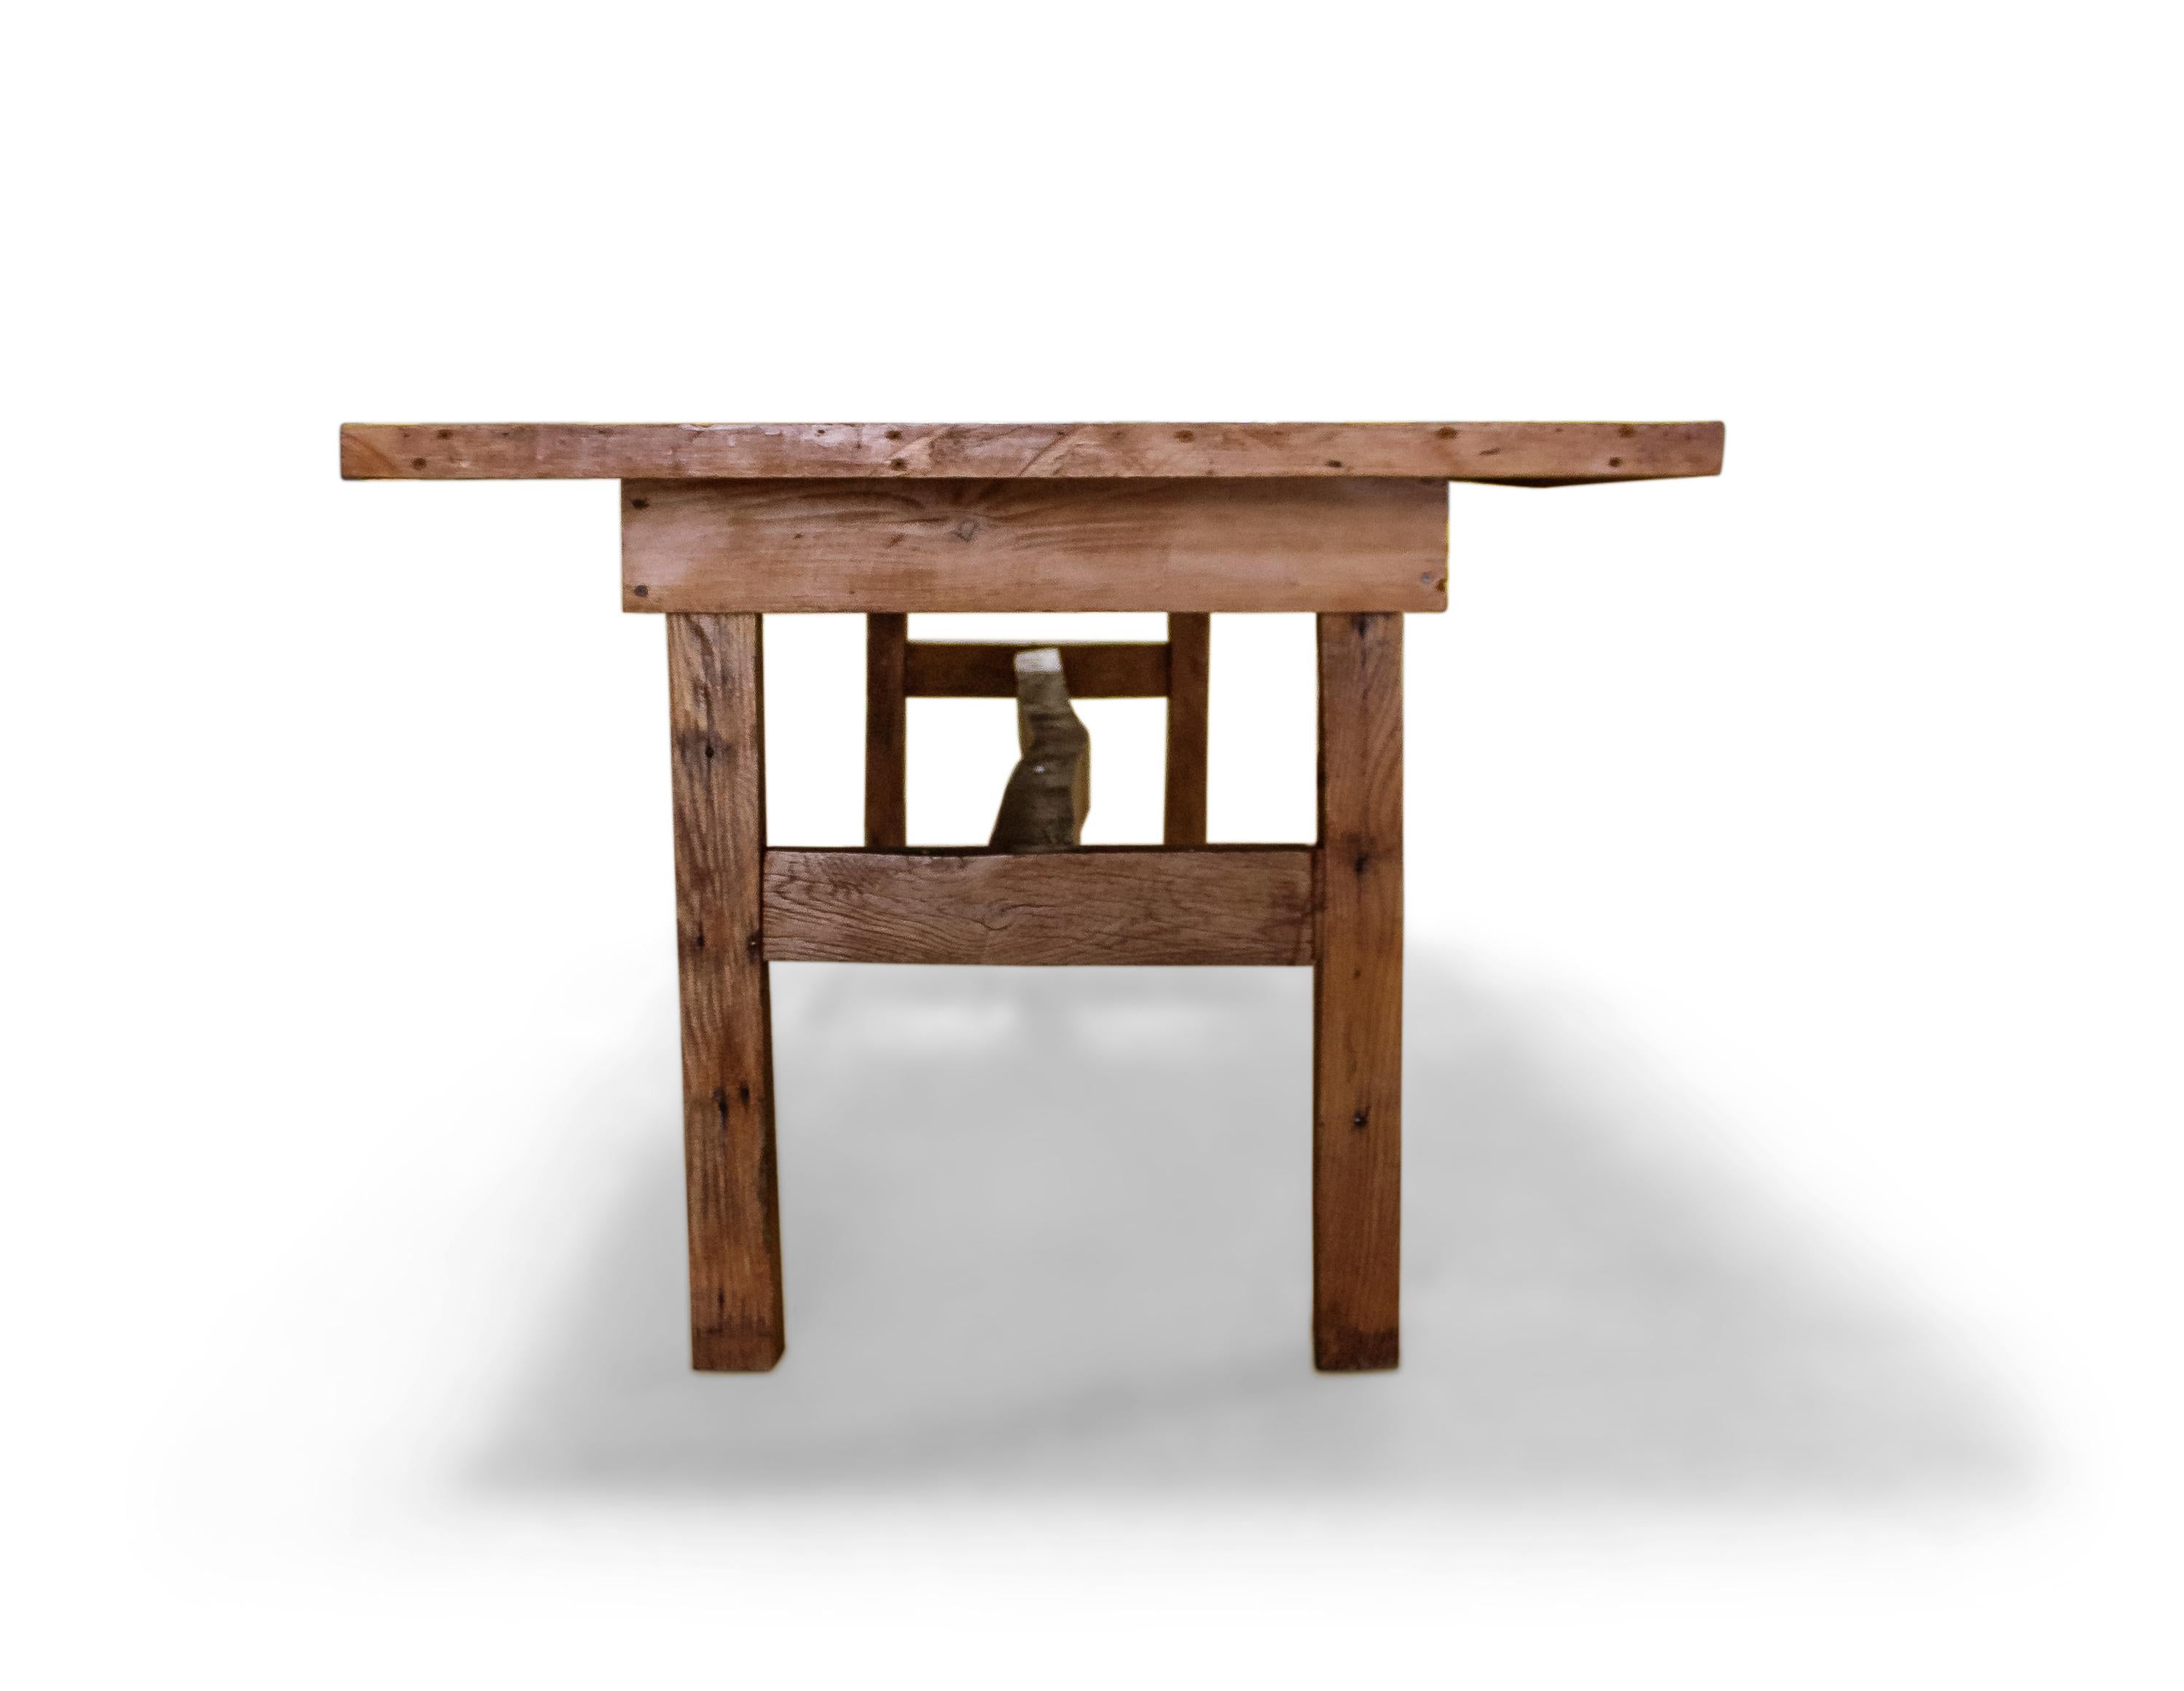 20th Century American Country Large Pine Dining Table